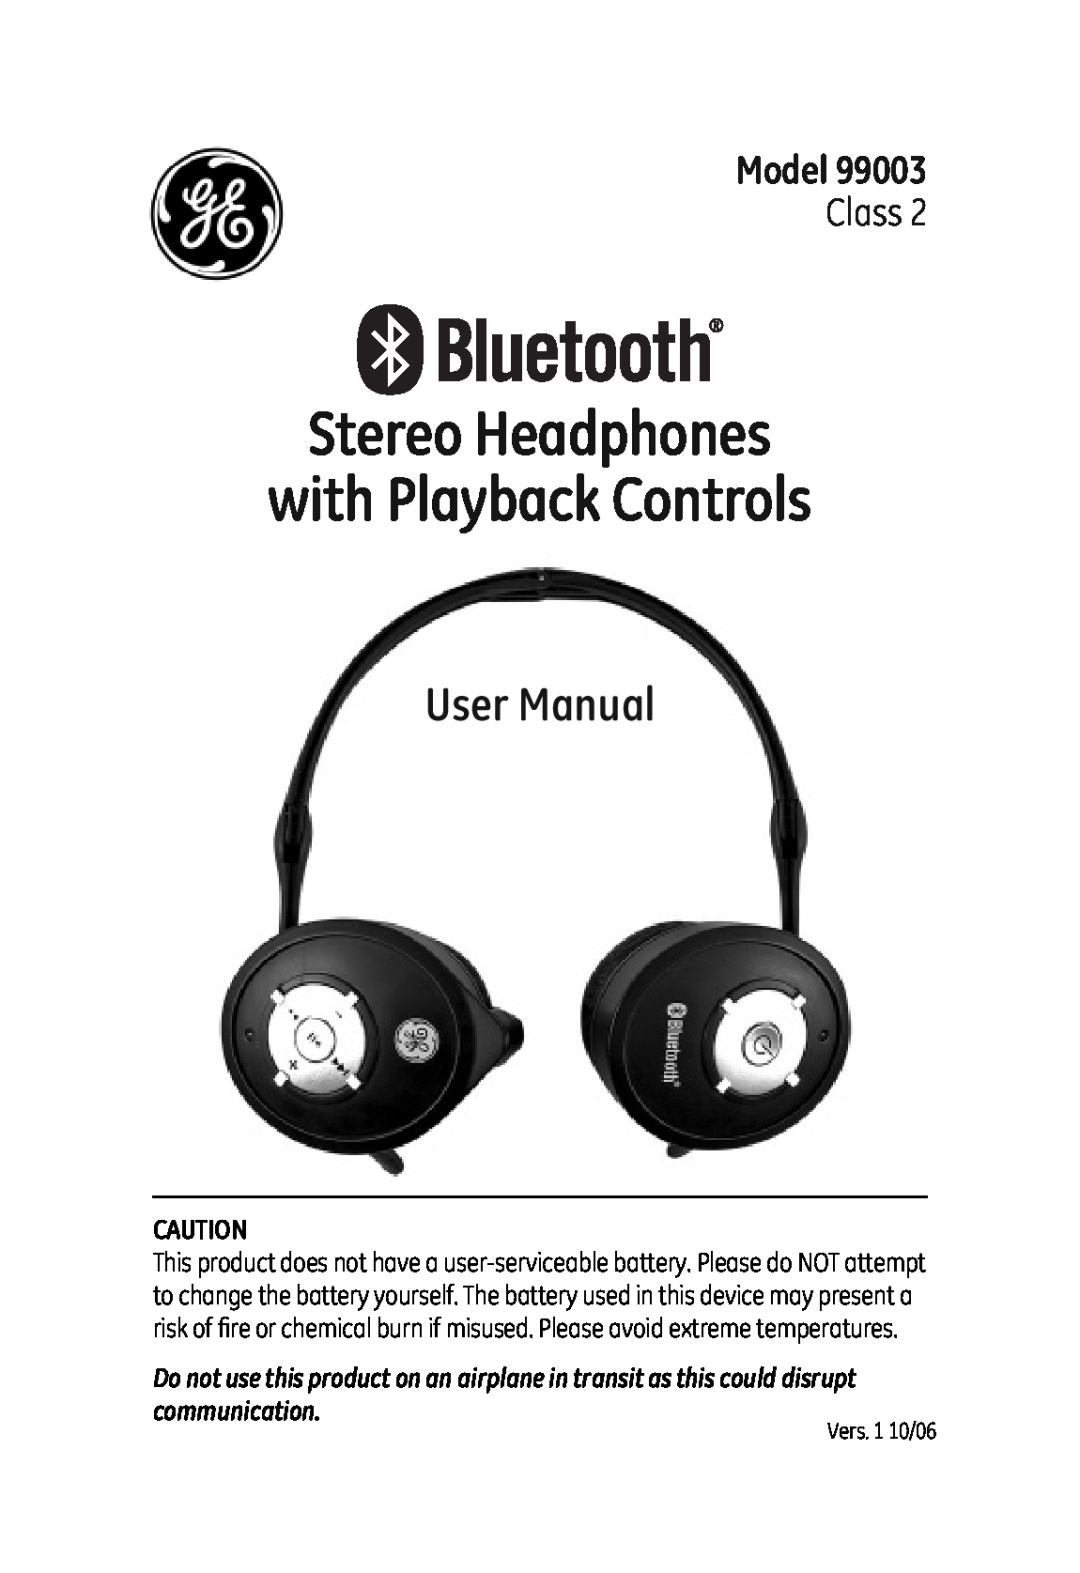 Jasco 99003 user manual Stereo Headphones with Playback Controls, Model, Class 